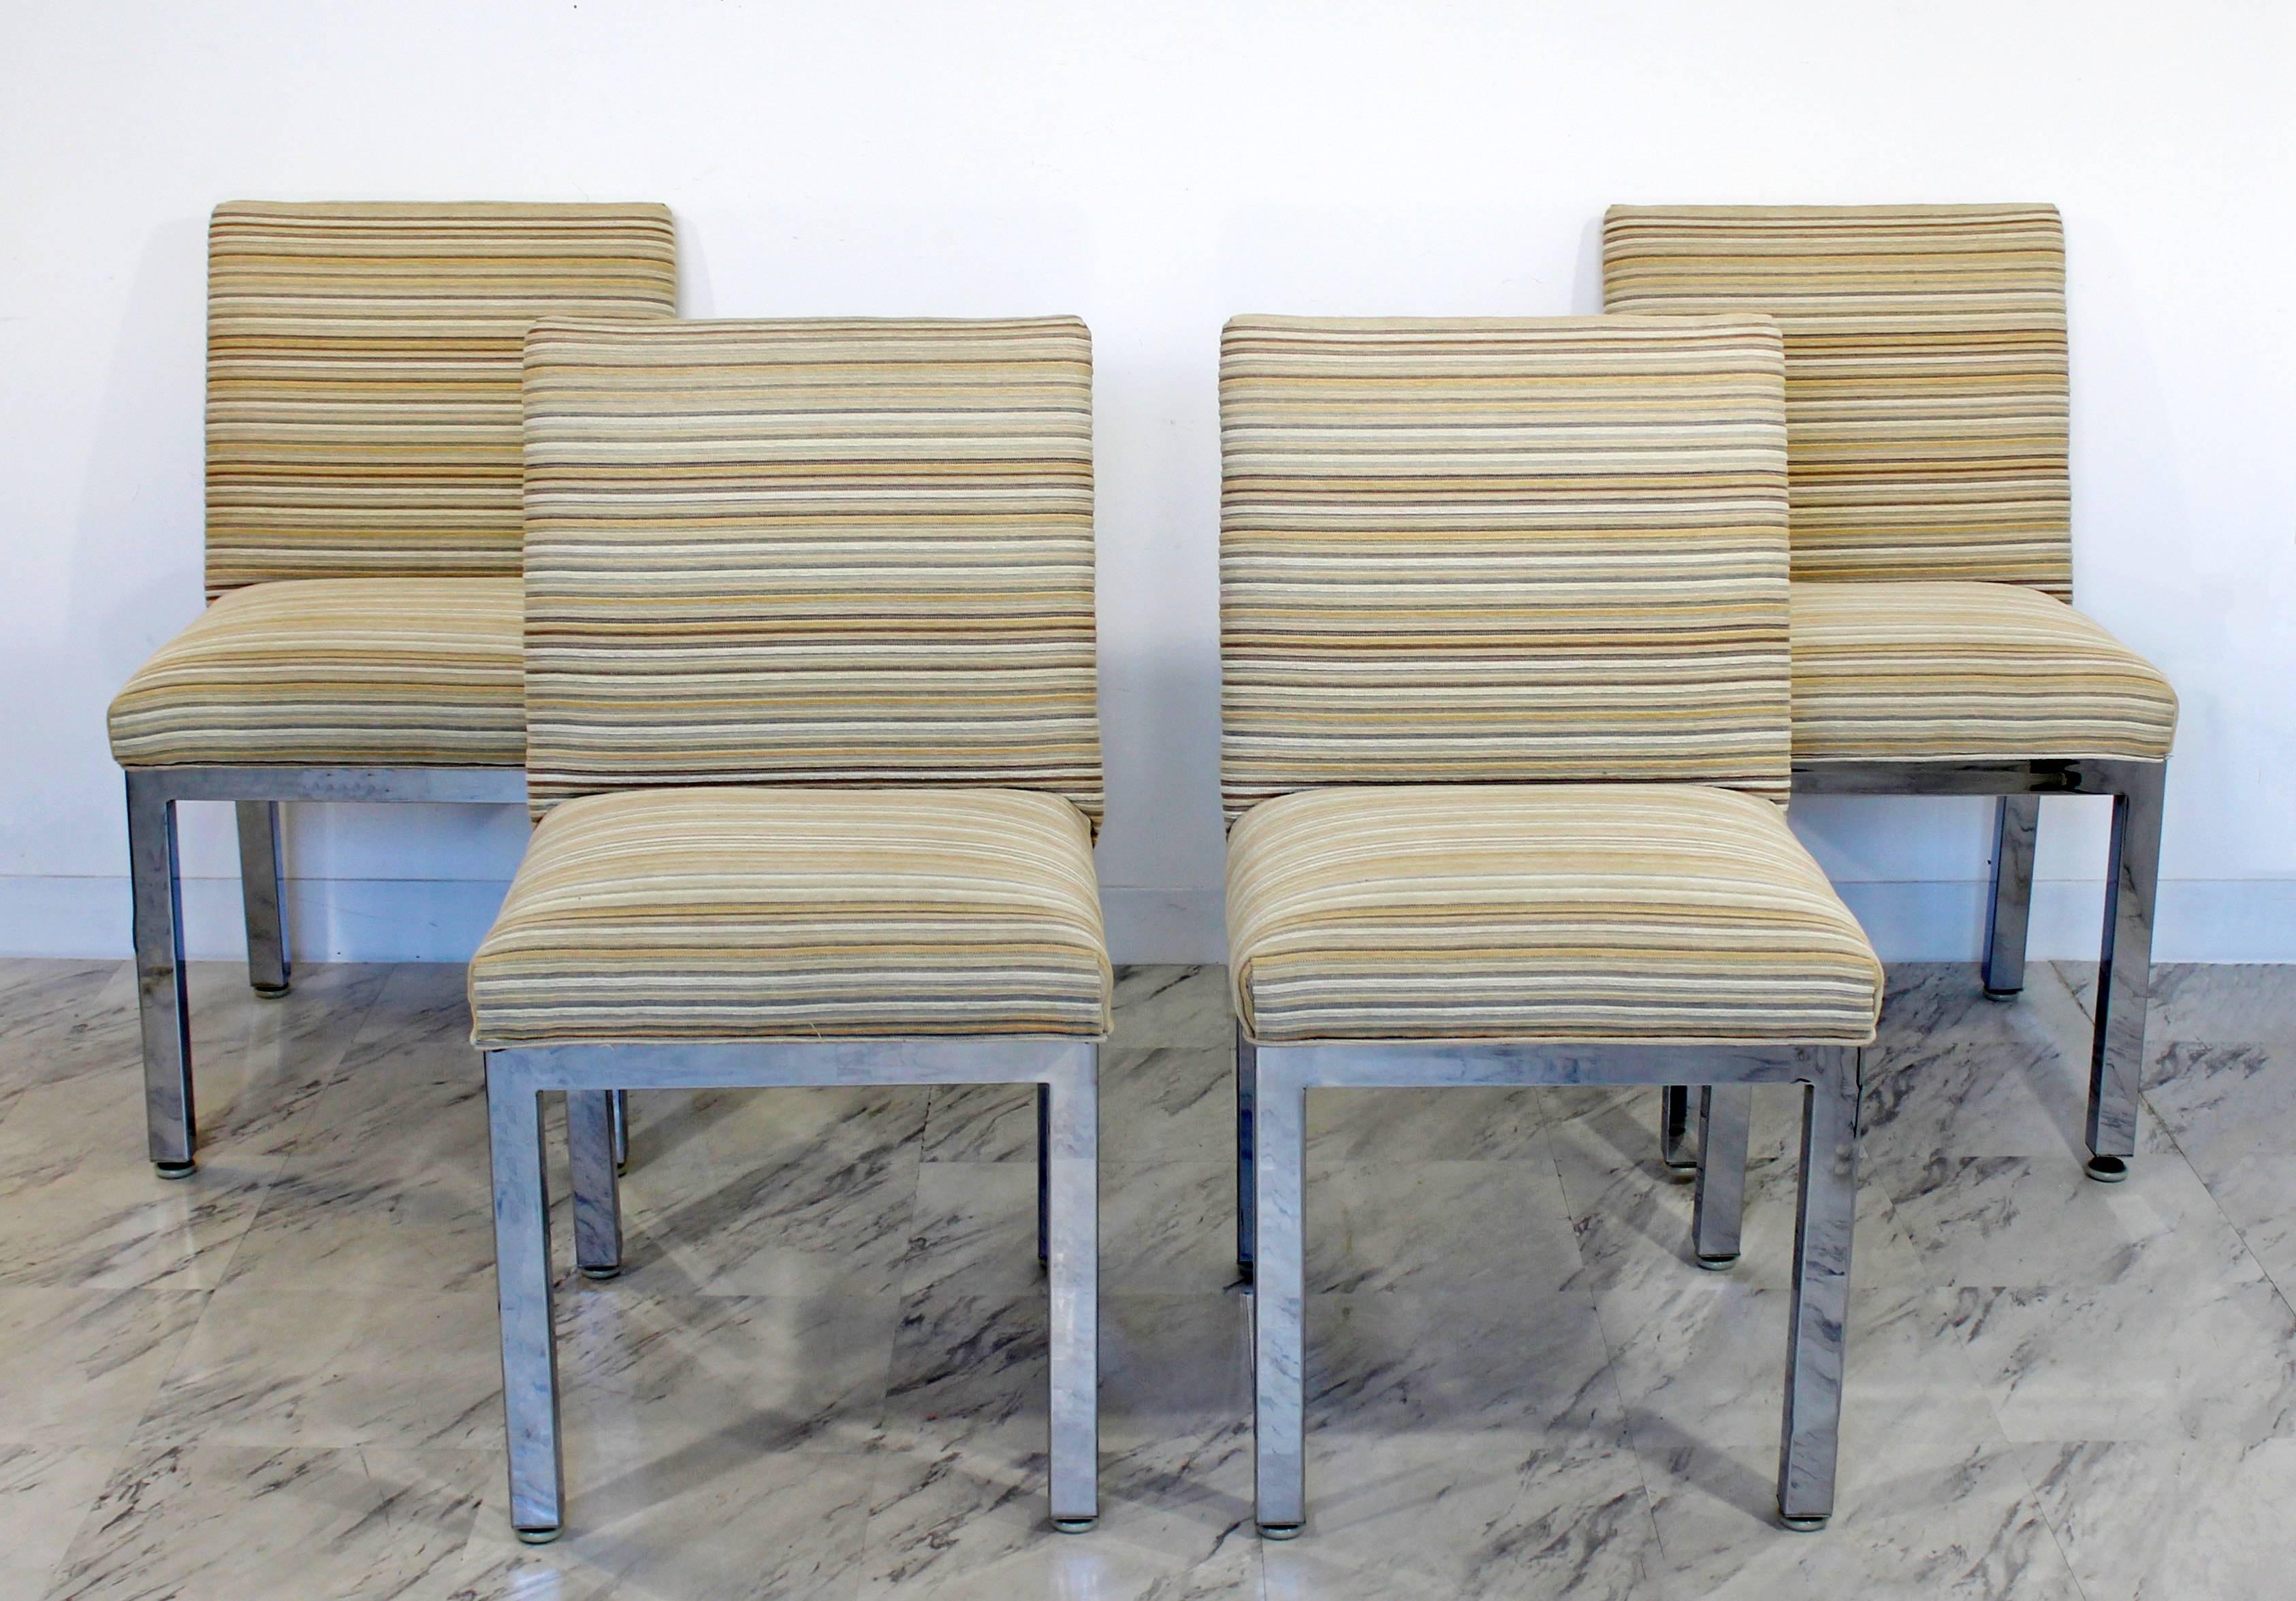 For your consideration is a magnificent set of four, chrome, side, dining chairs by Milo Baughman for the Design Institute of America, circa the 1970s. In excellent condition. The dimensions are 18